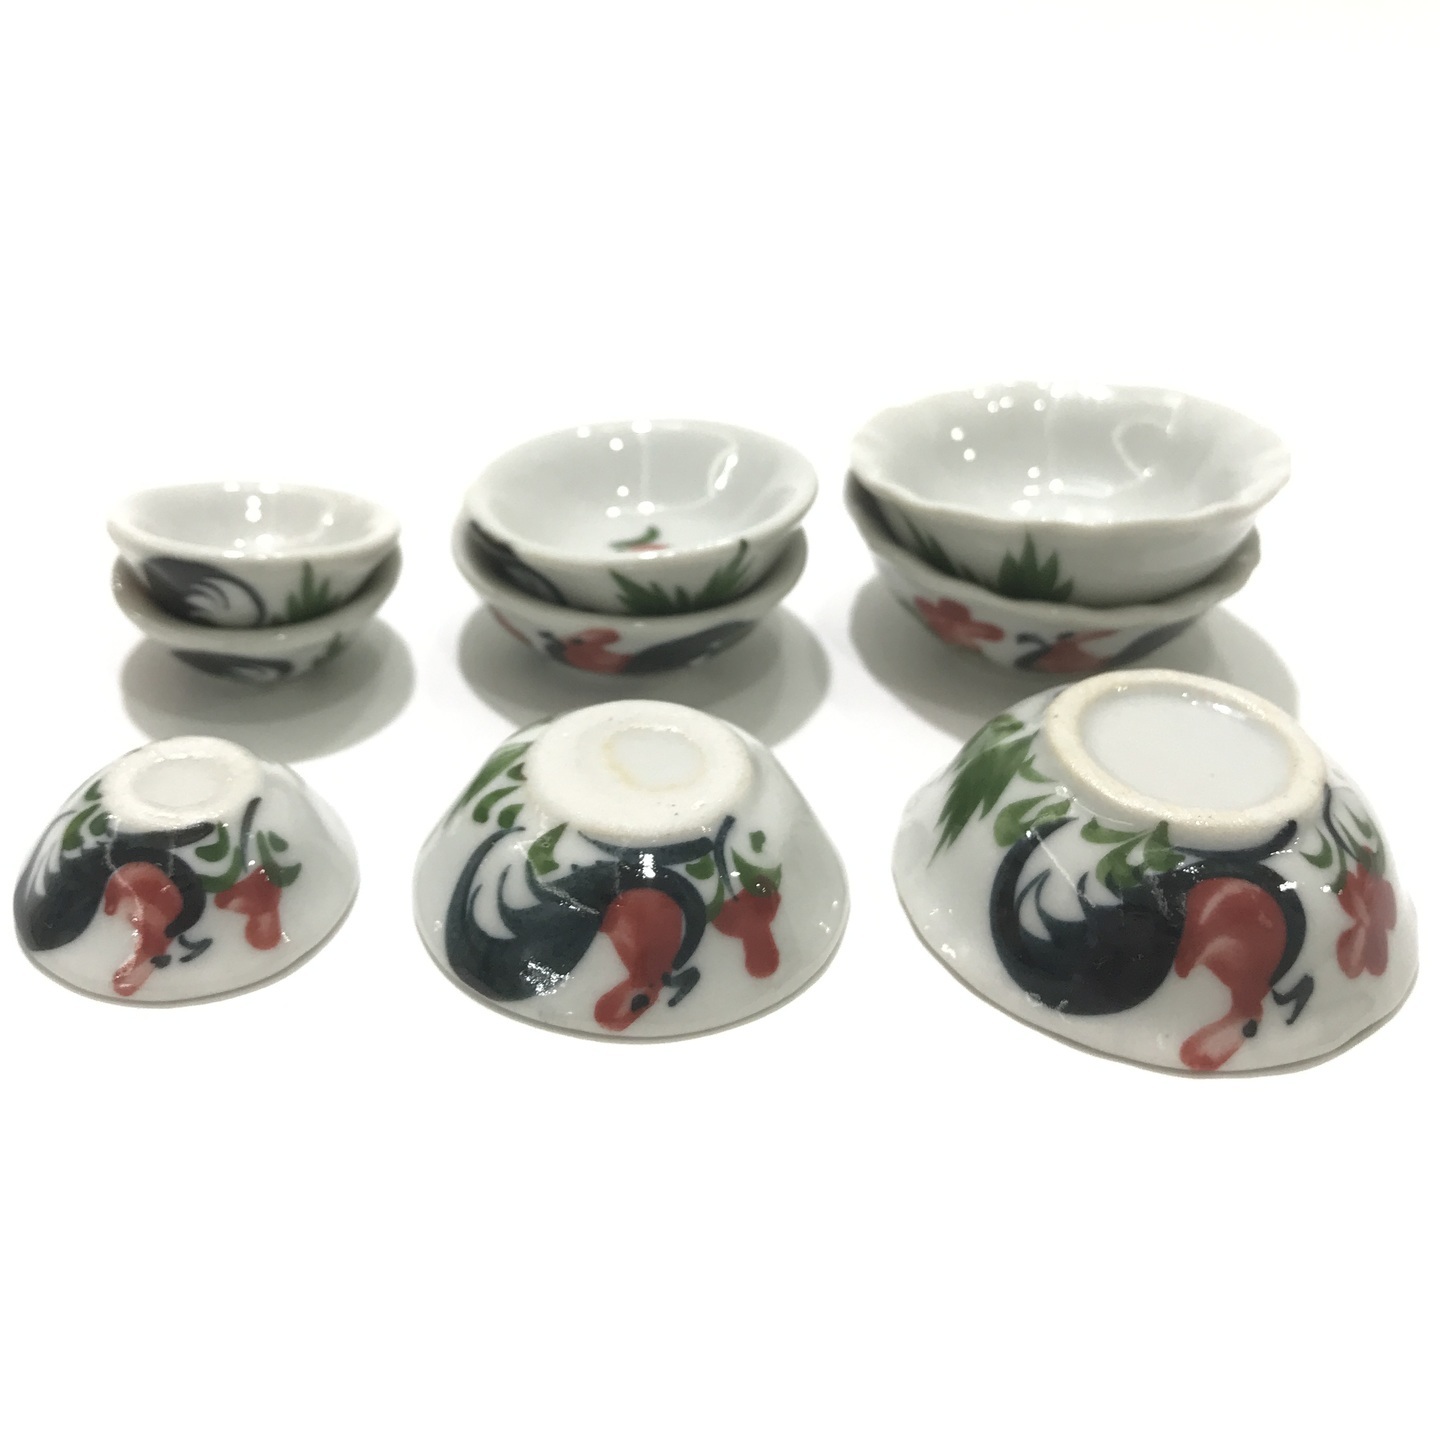 Dollhouse Ceramic Rooster Bowls